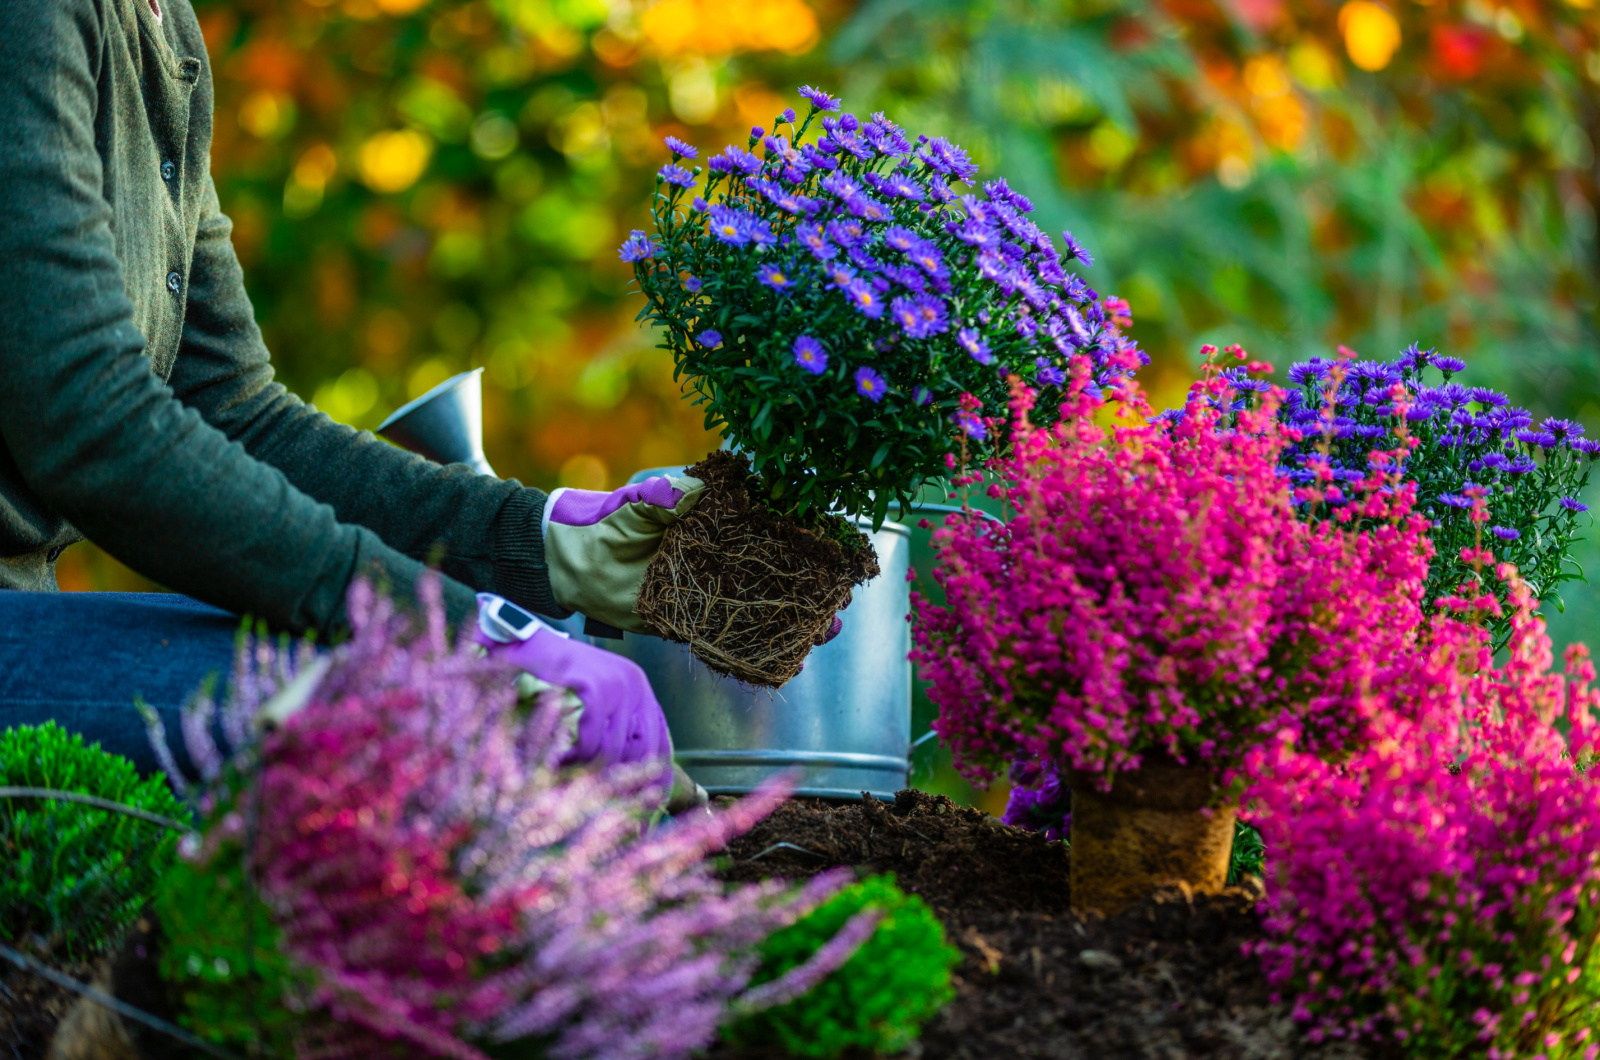 A woman plants autumn asters flower in the garden